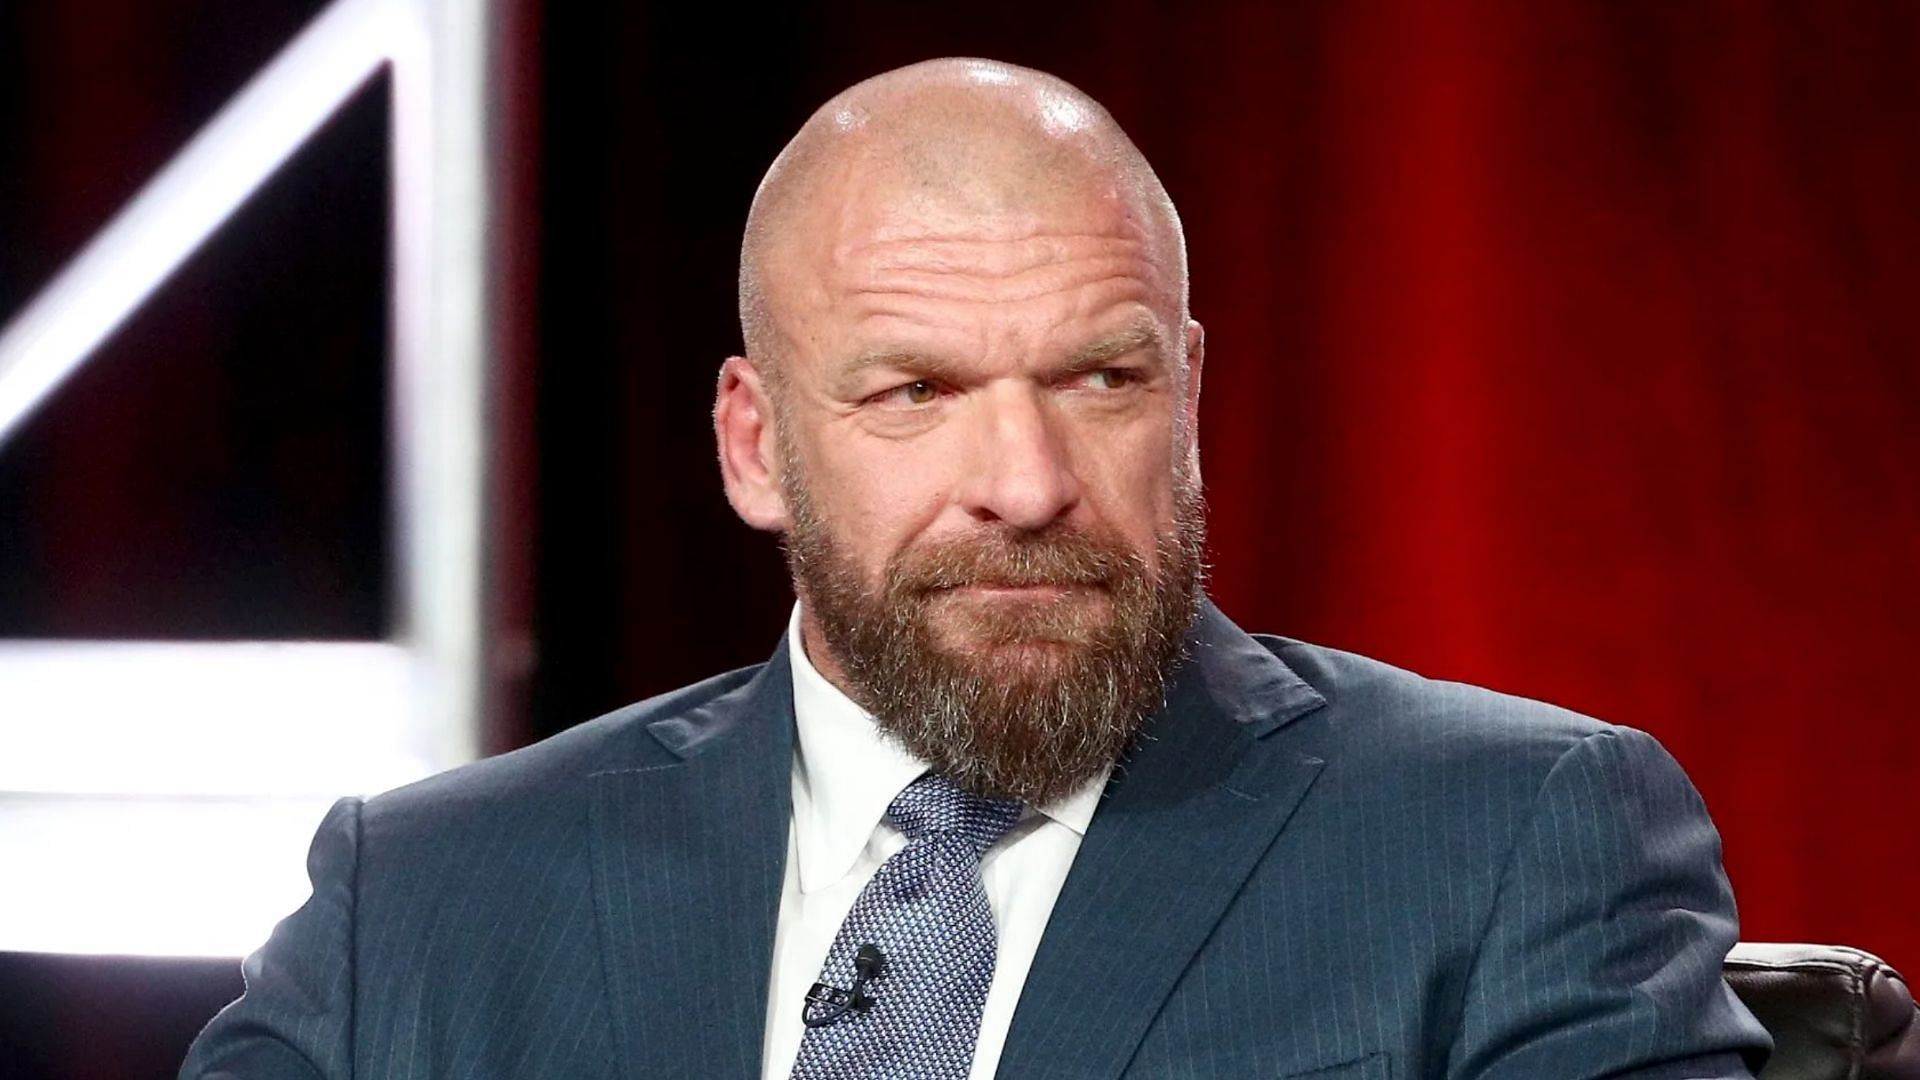 Triple H was previously at the helm of WWE NXT